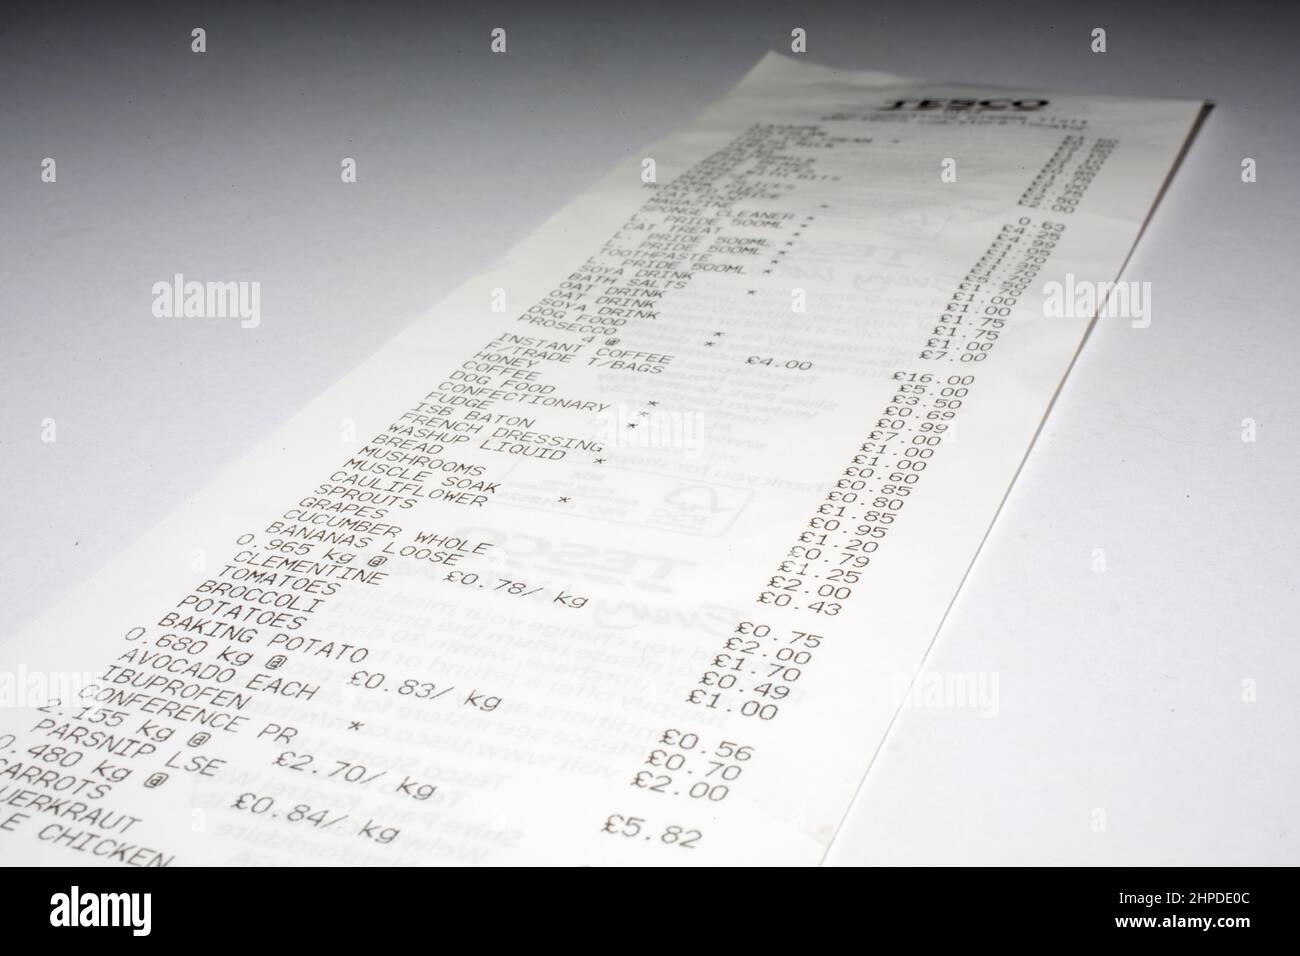 An itemised supermarket shopping bill, receipt. From Tesco, UK. Stock Photo